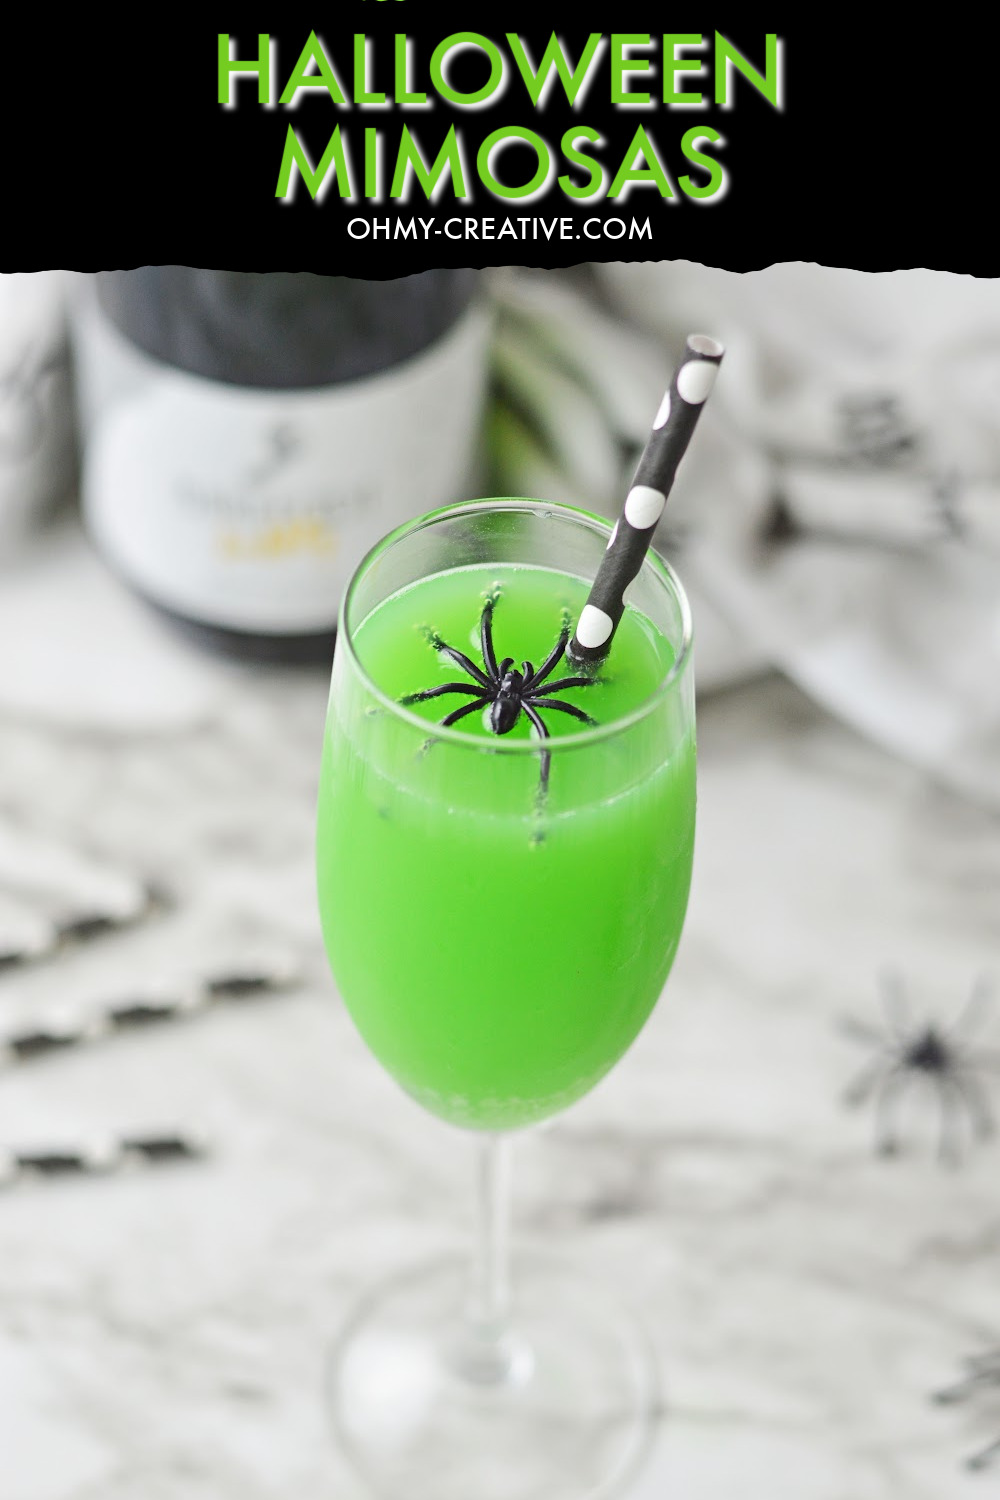 These spooky Halloween Mimosas are displayed on a black and gray marble background with creepy spiders and black and white straws in the background. There is also a champagne bottle in the background.